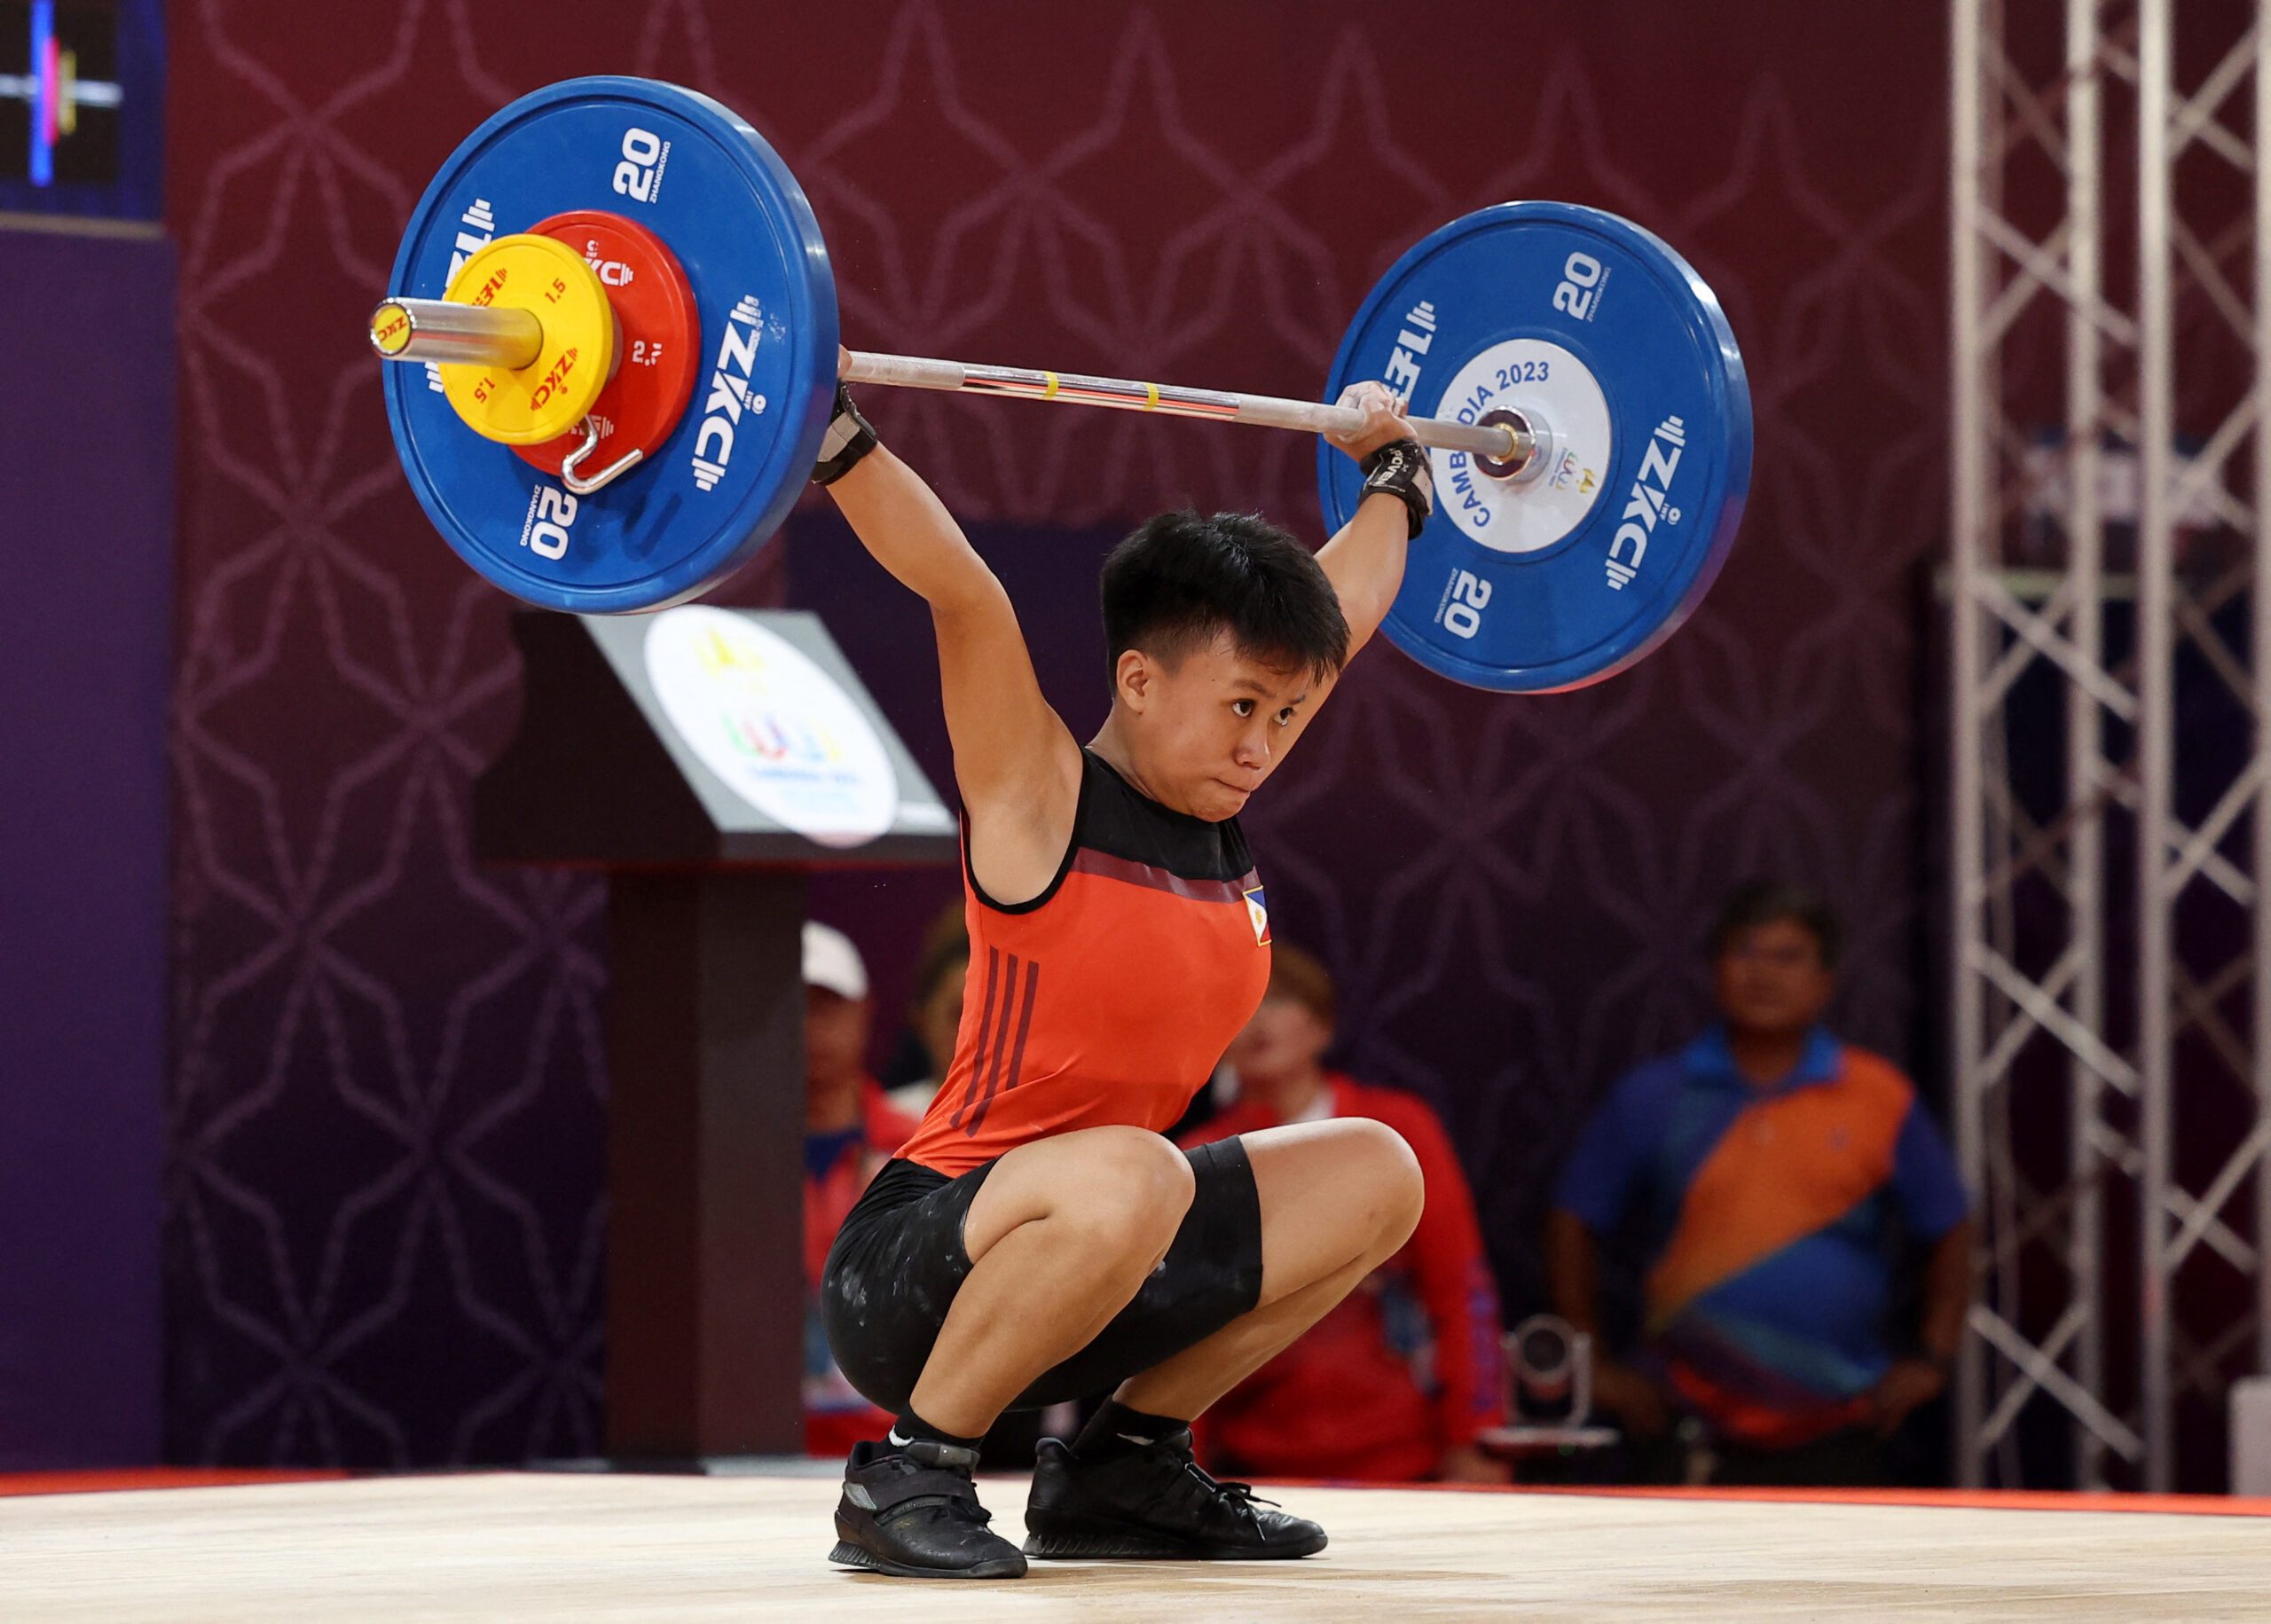 Teen weightlifter Angeline Colonia bags 1st SEA Games medal before 17th birthday